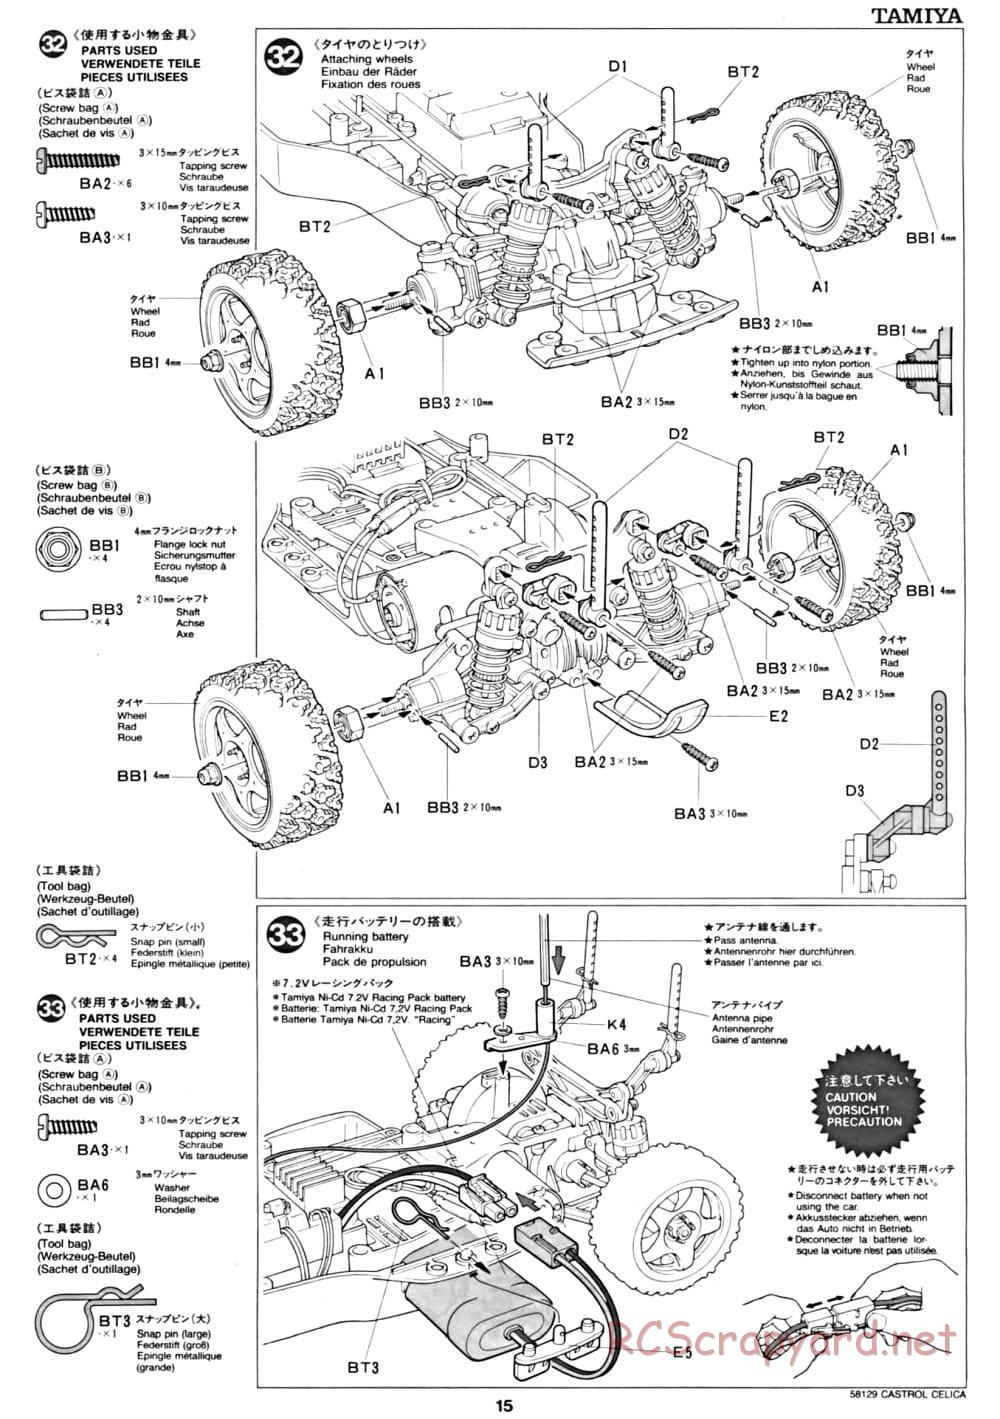 Tamiya - Castrol Celica 93 Monte-Carlo - TA-02 Chassis - Manual - Page 15